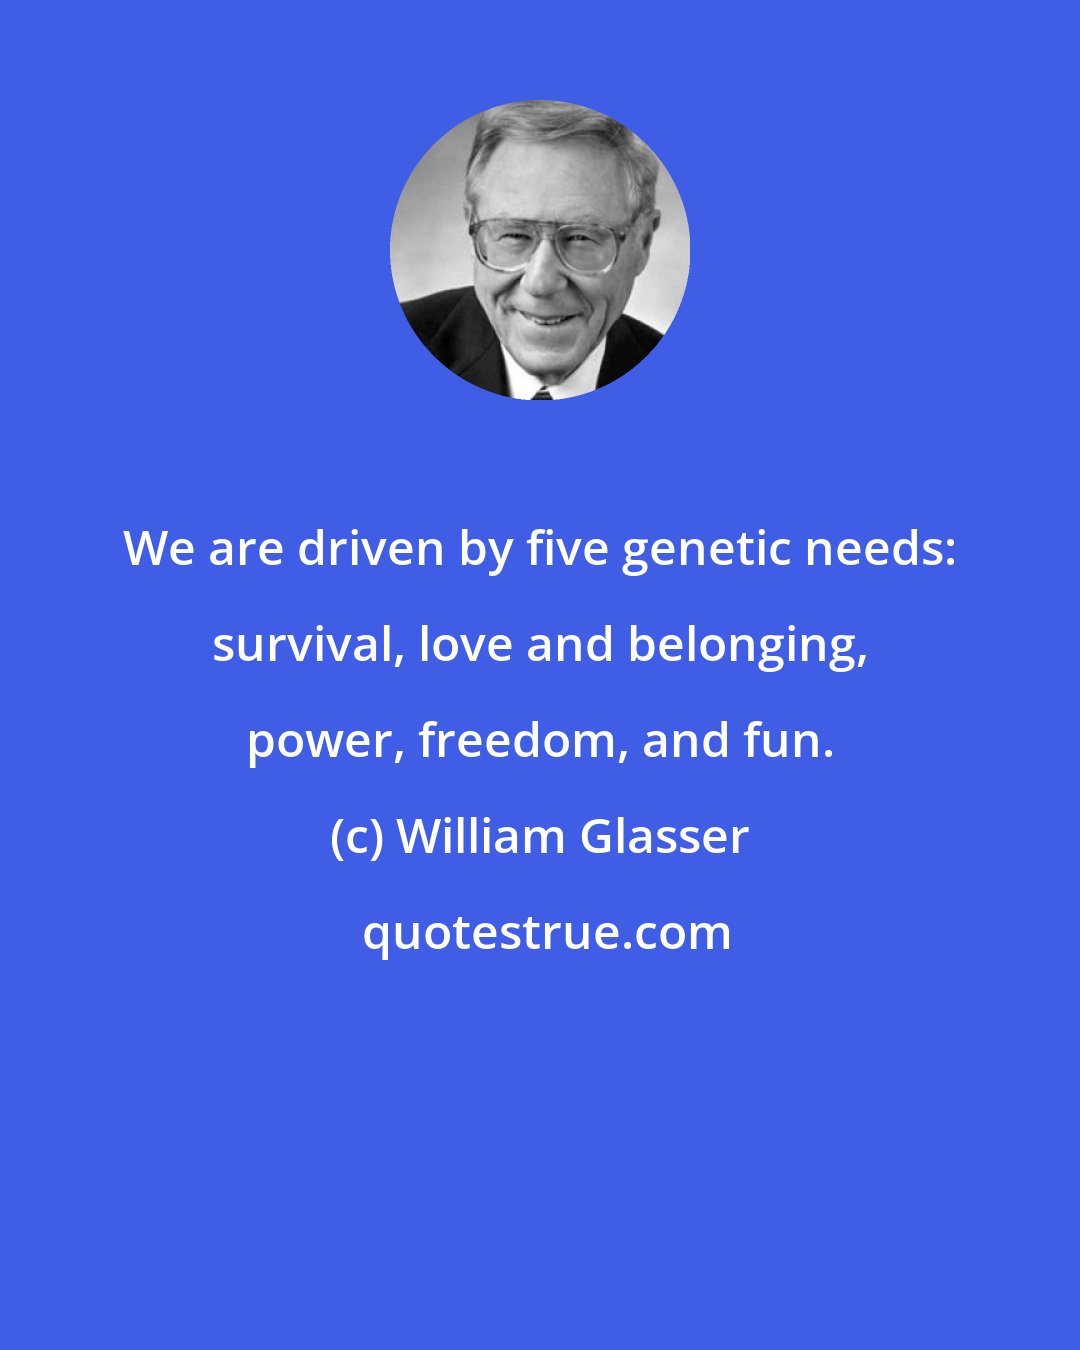 William Glasser: We are driven by five genetic needs: survival, love and belonging, power, freedom, and fun.